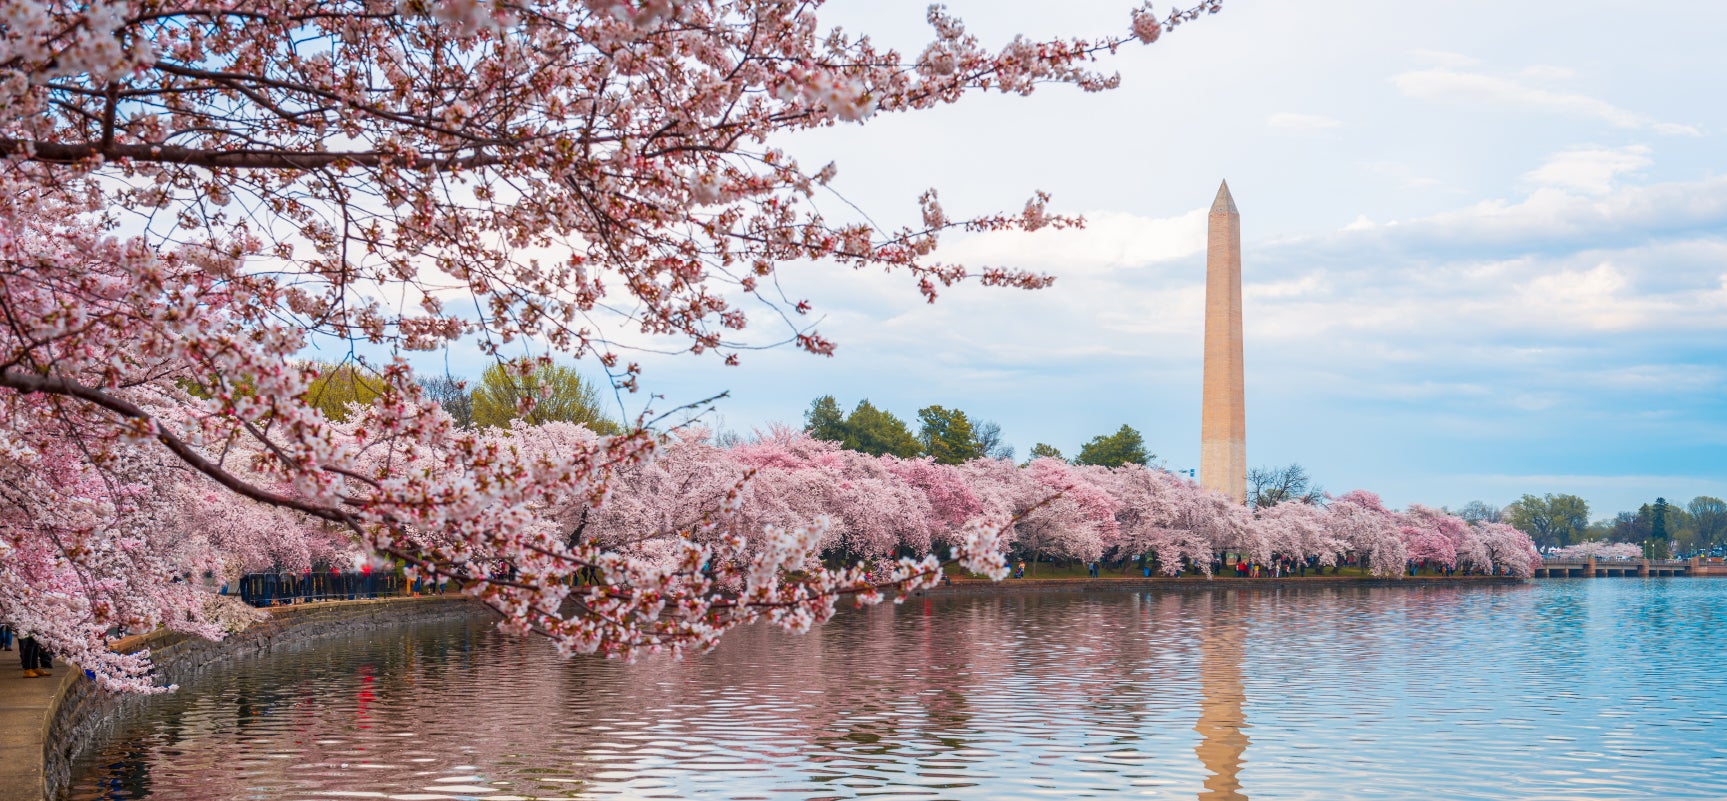 Cherry blossoms surrounding the Washington Monument as it reflects off the lake